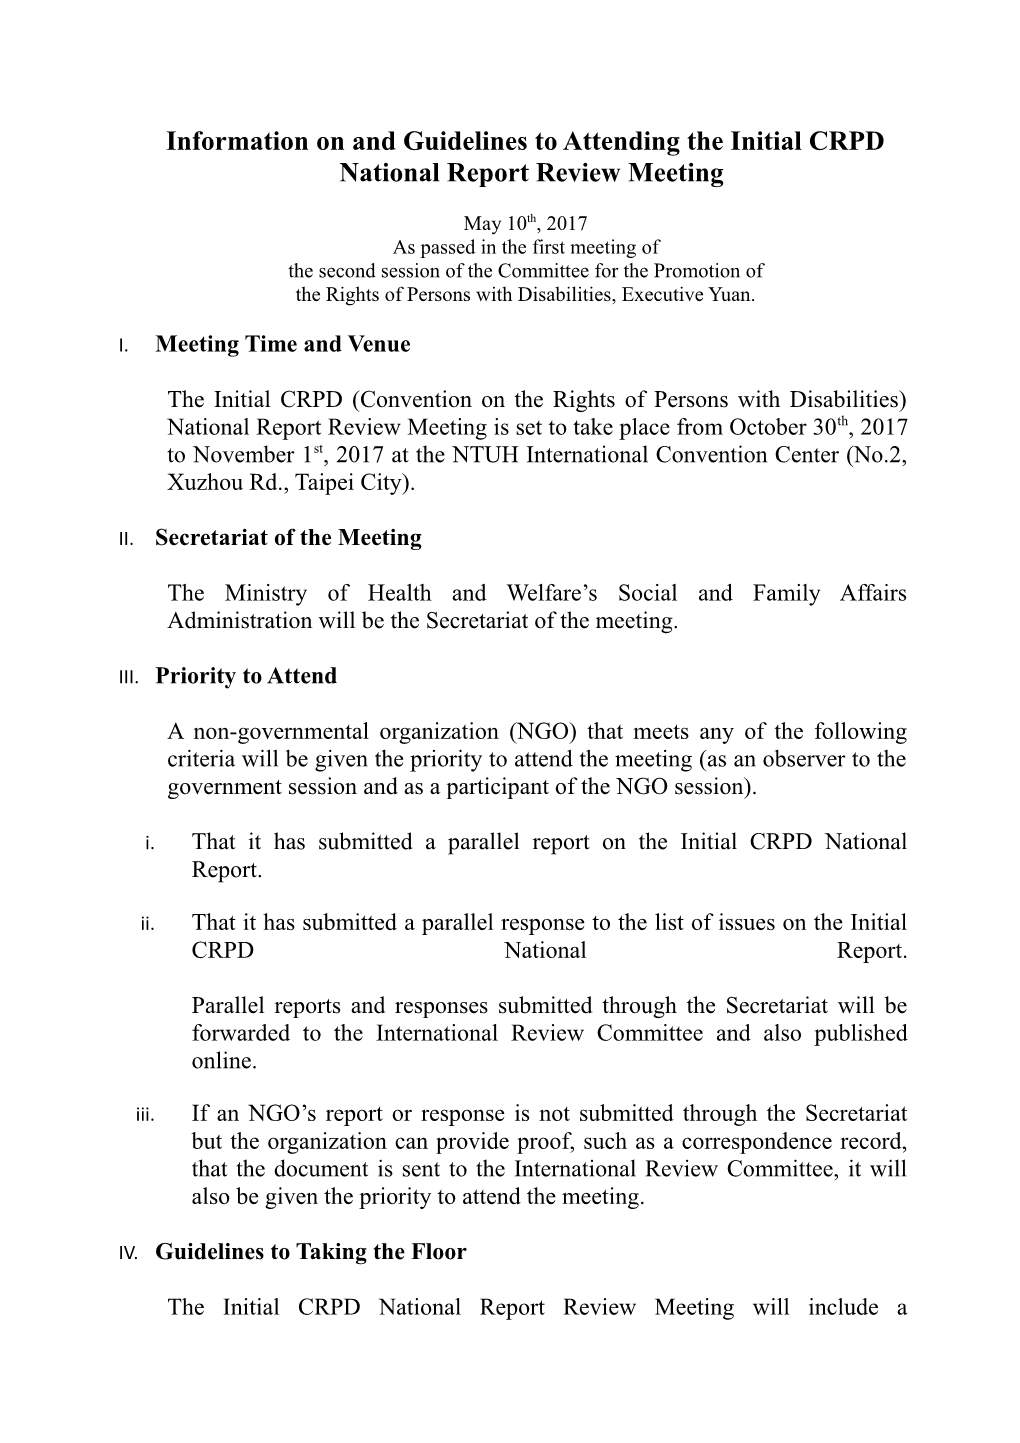 Information on and Guidelines to Attending the Initial CRPD National Report Review Meeting